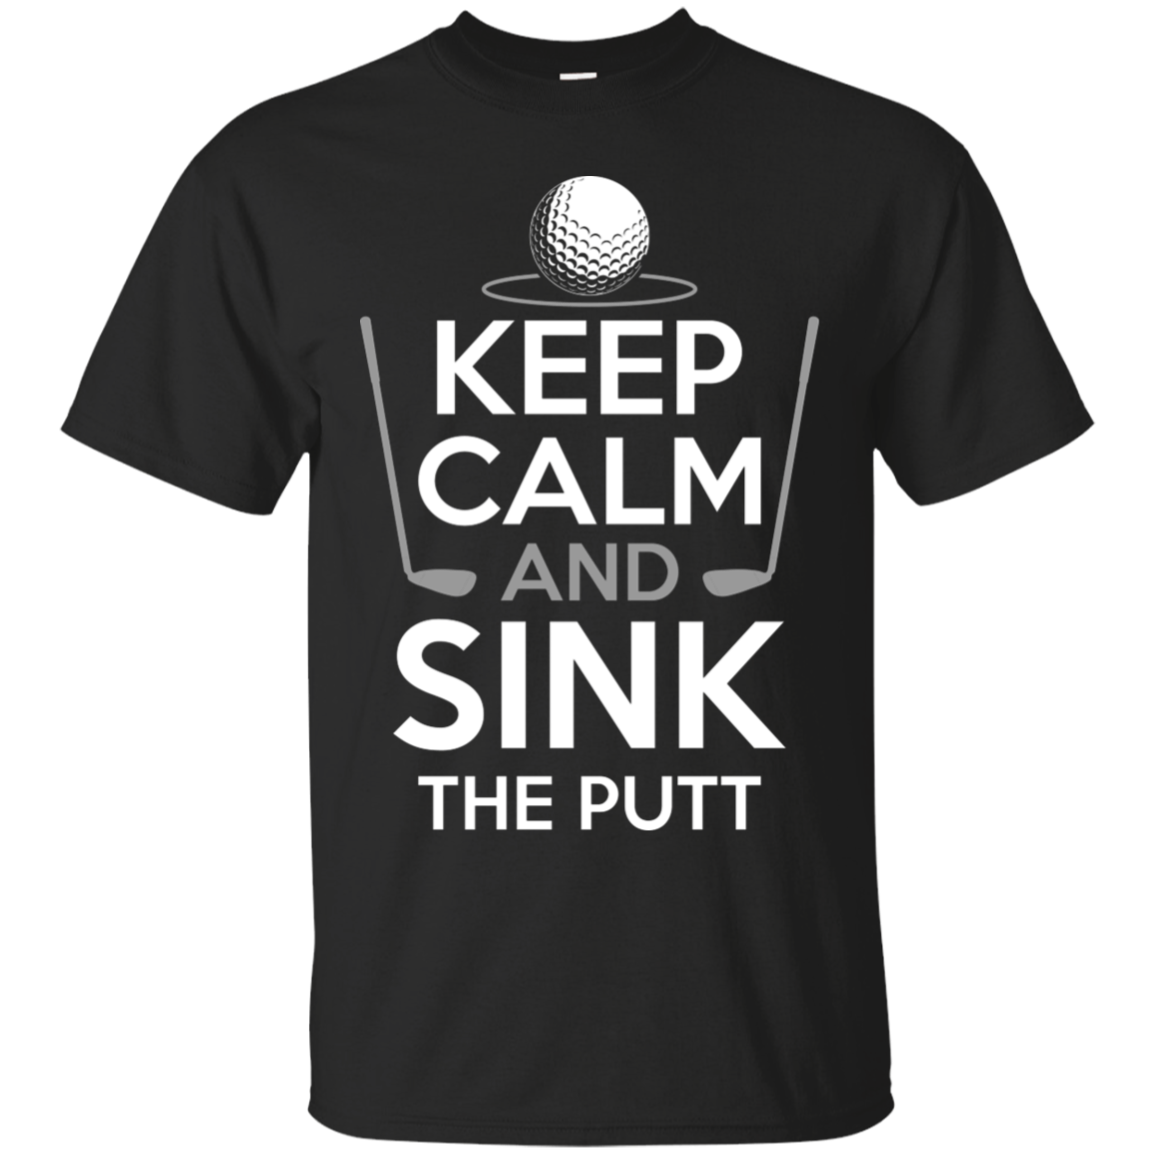 Keep Calm And Sink The Putt T-Shirt Apparel - The Beer Lodge